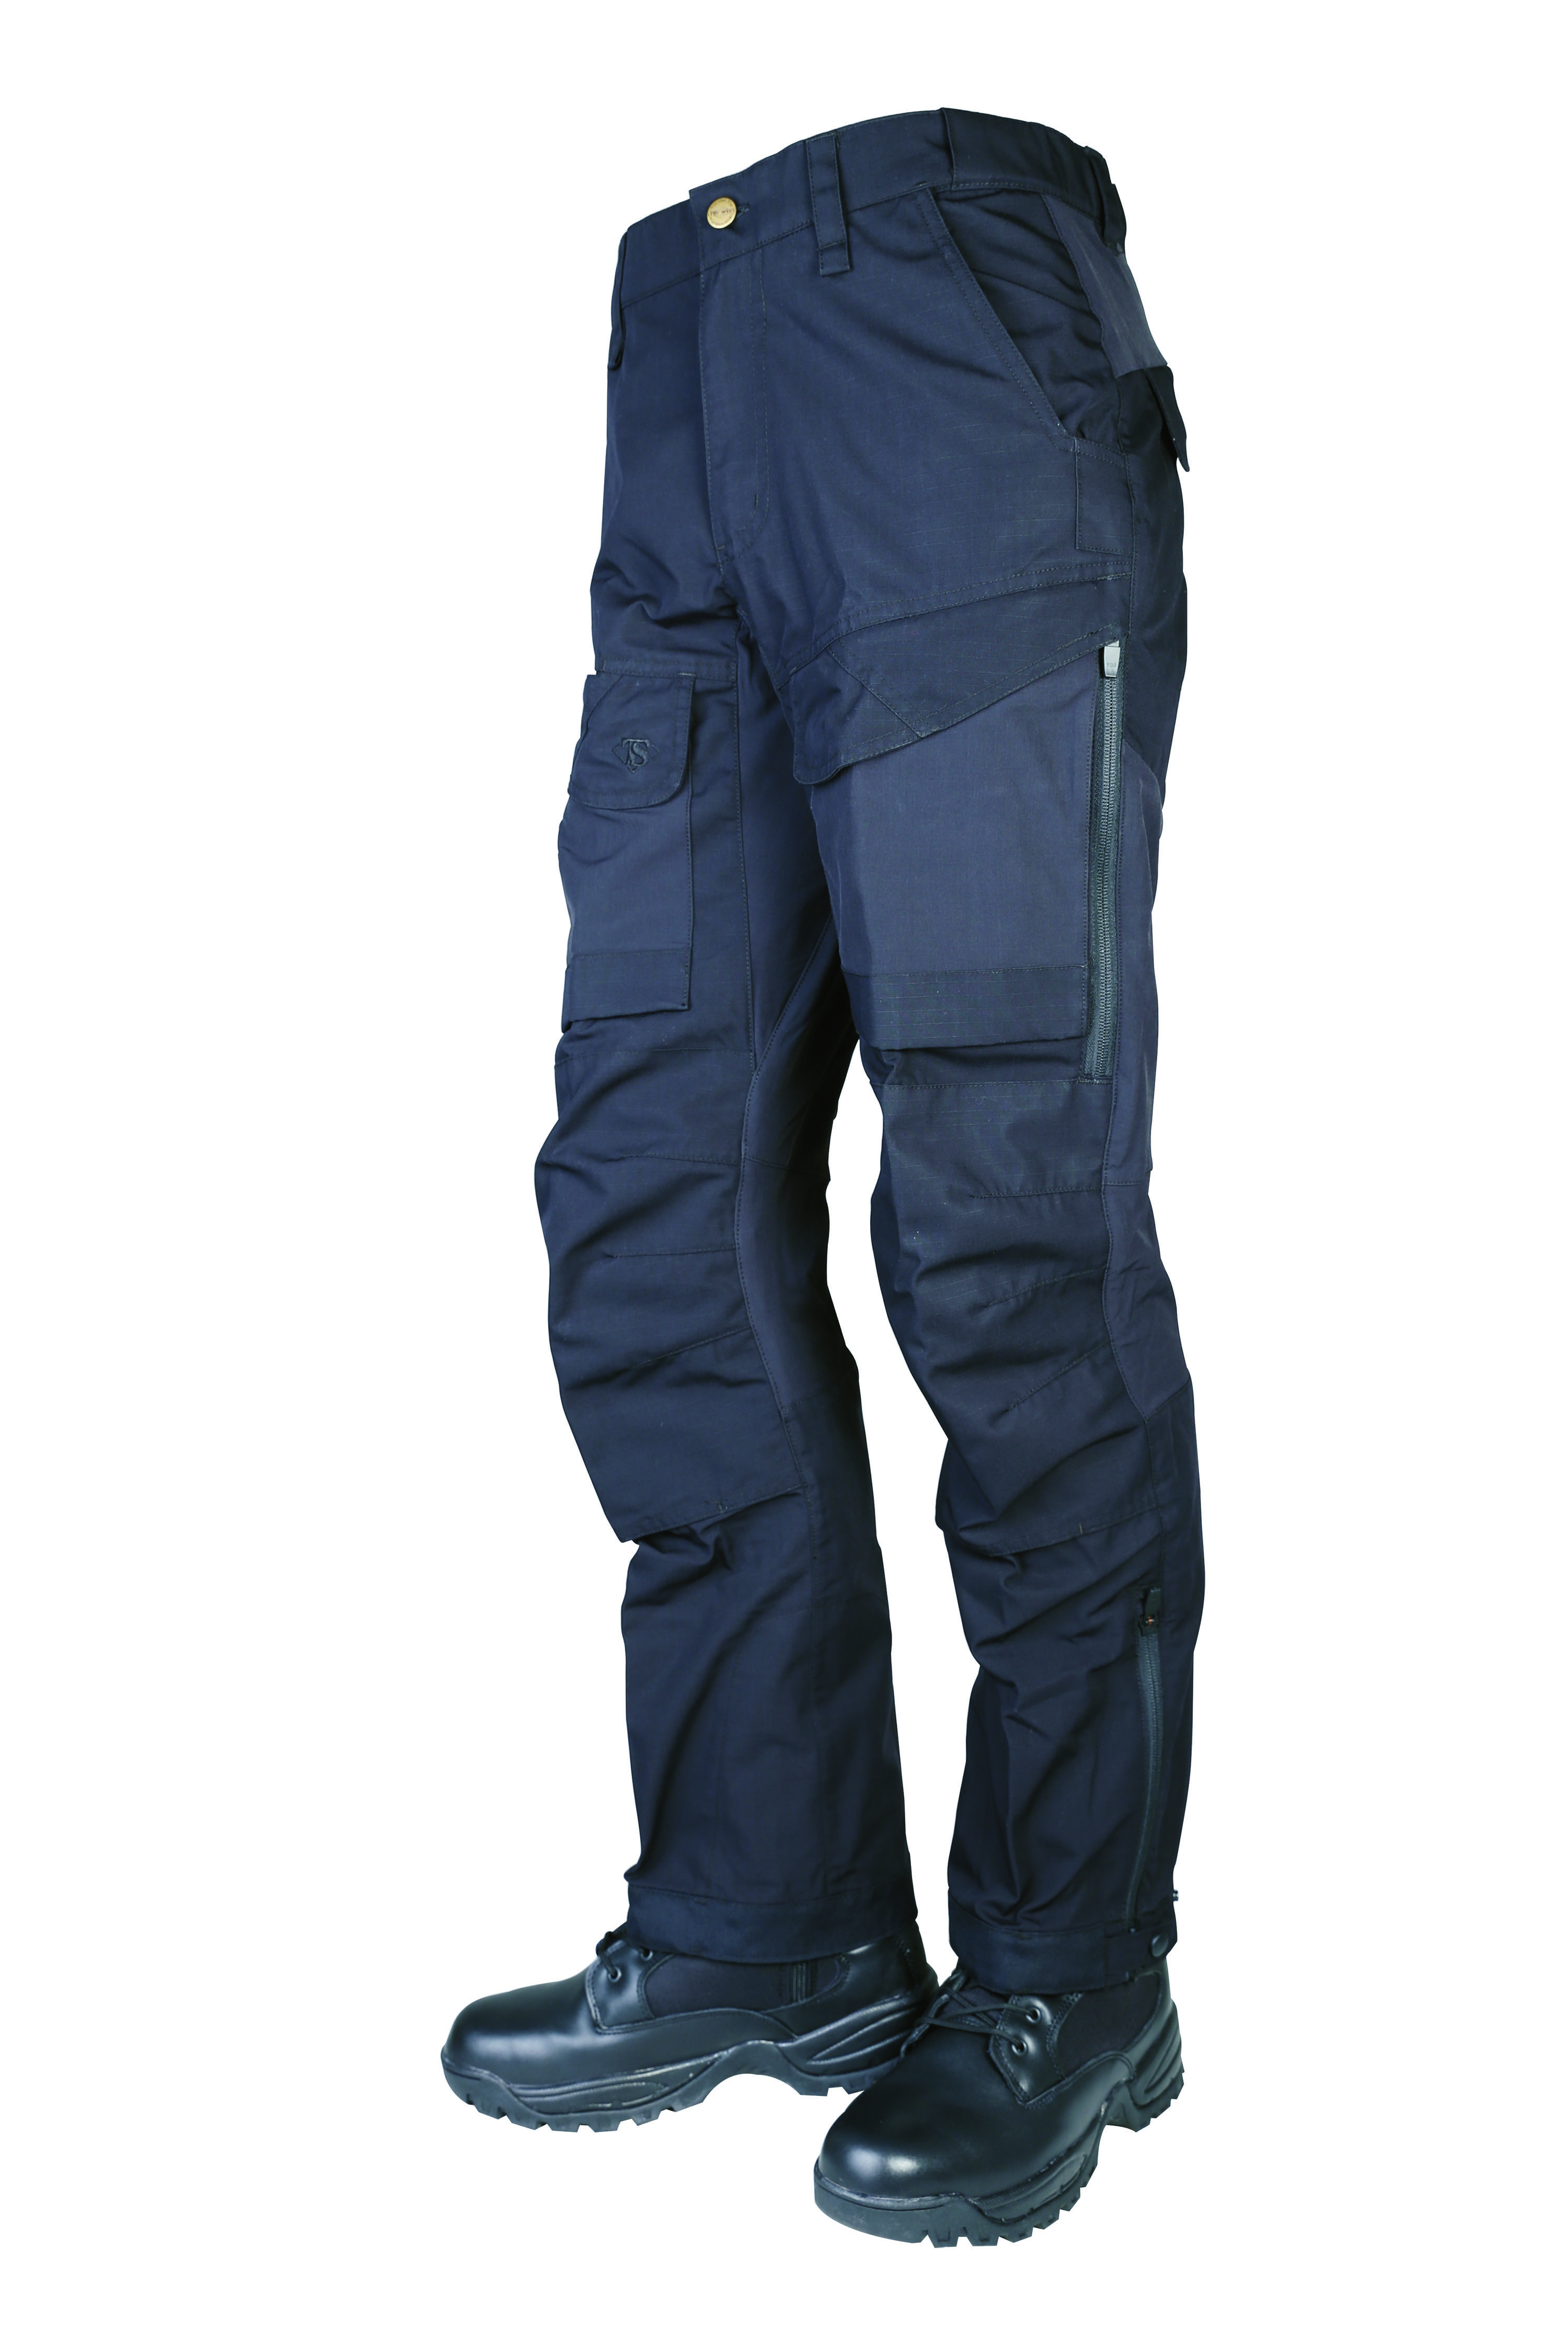 Tru-Spec 24-7 Xpedition Pant - Men's | Up to 26% Off 4.8 Star 